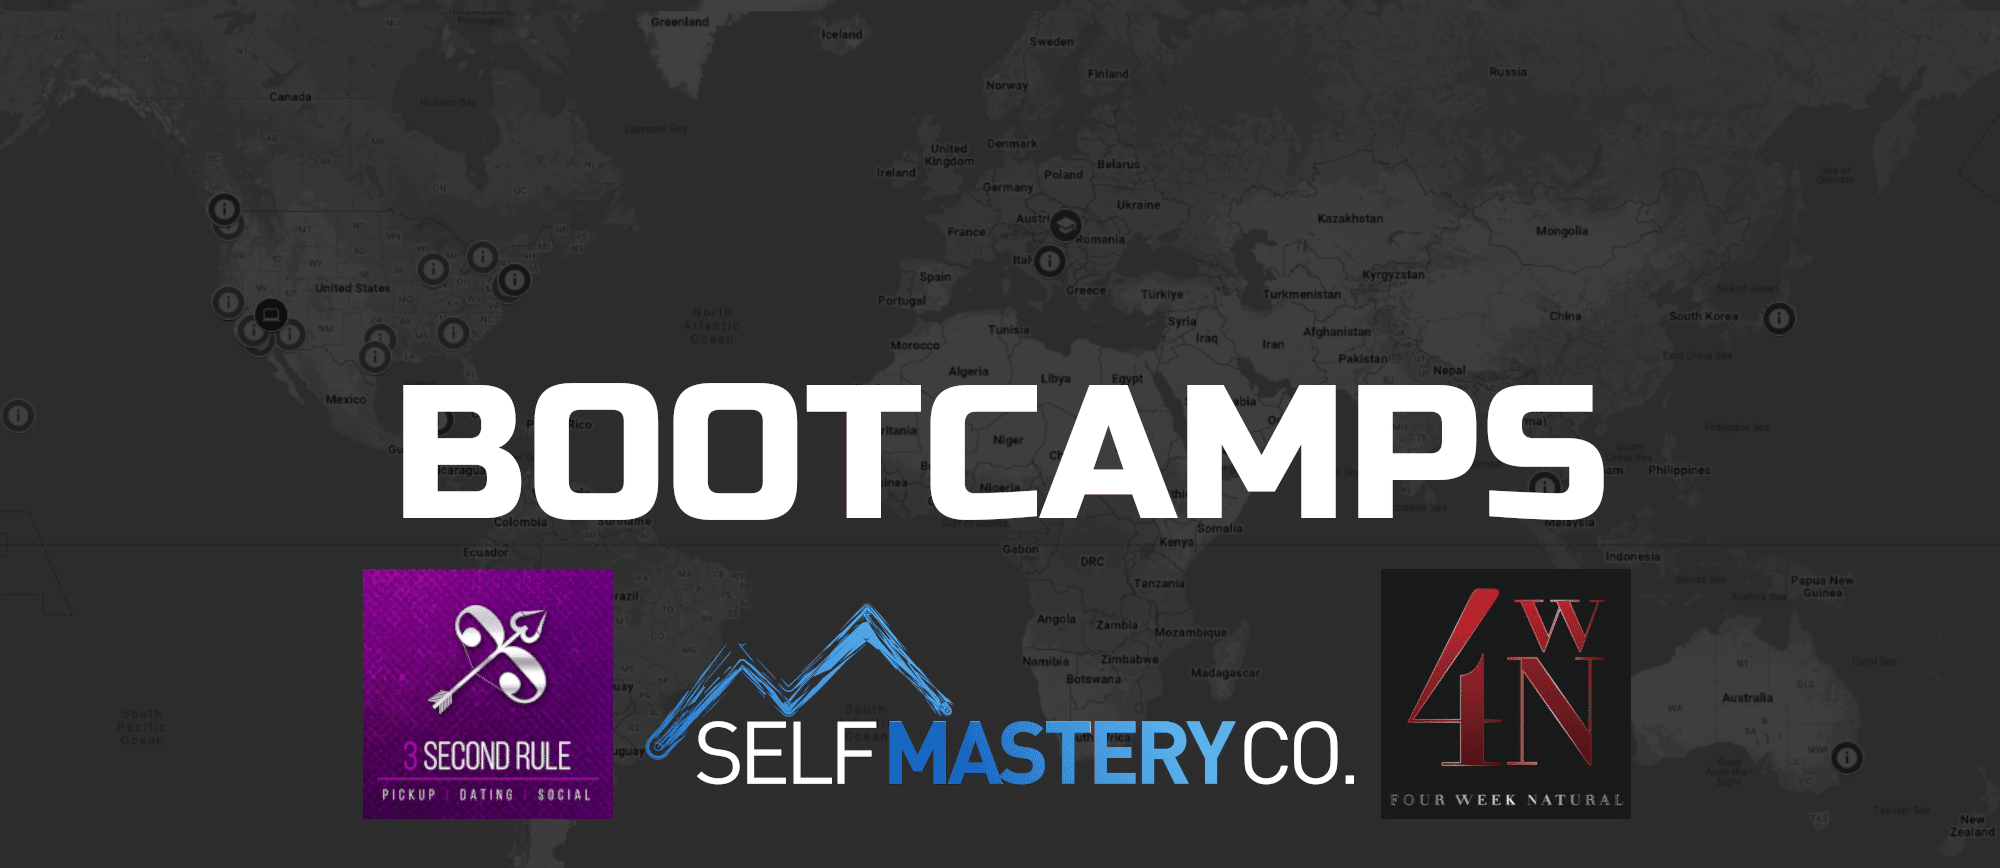 Bootcamps Self Mastery Co Real Social Dynamics RSD 4WN 4 Week Natural The Game Neil Strauss Mystery Erik Bootcamp 3SR 3 Second Rule